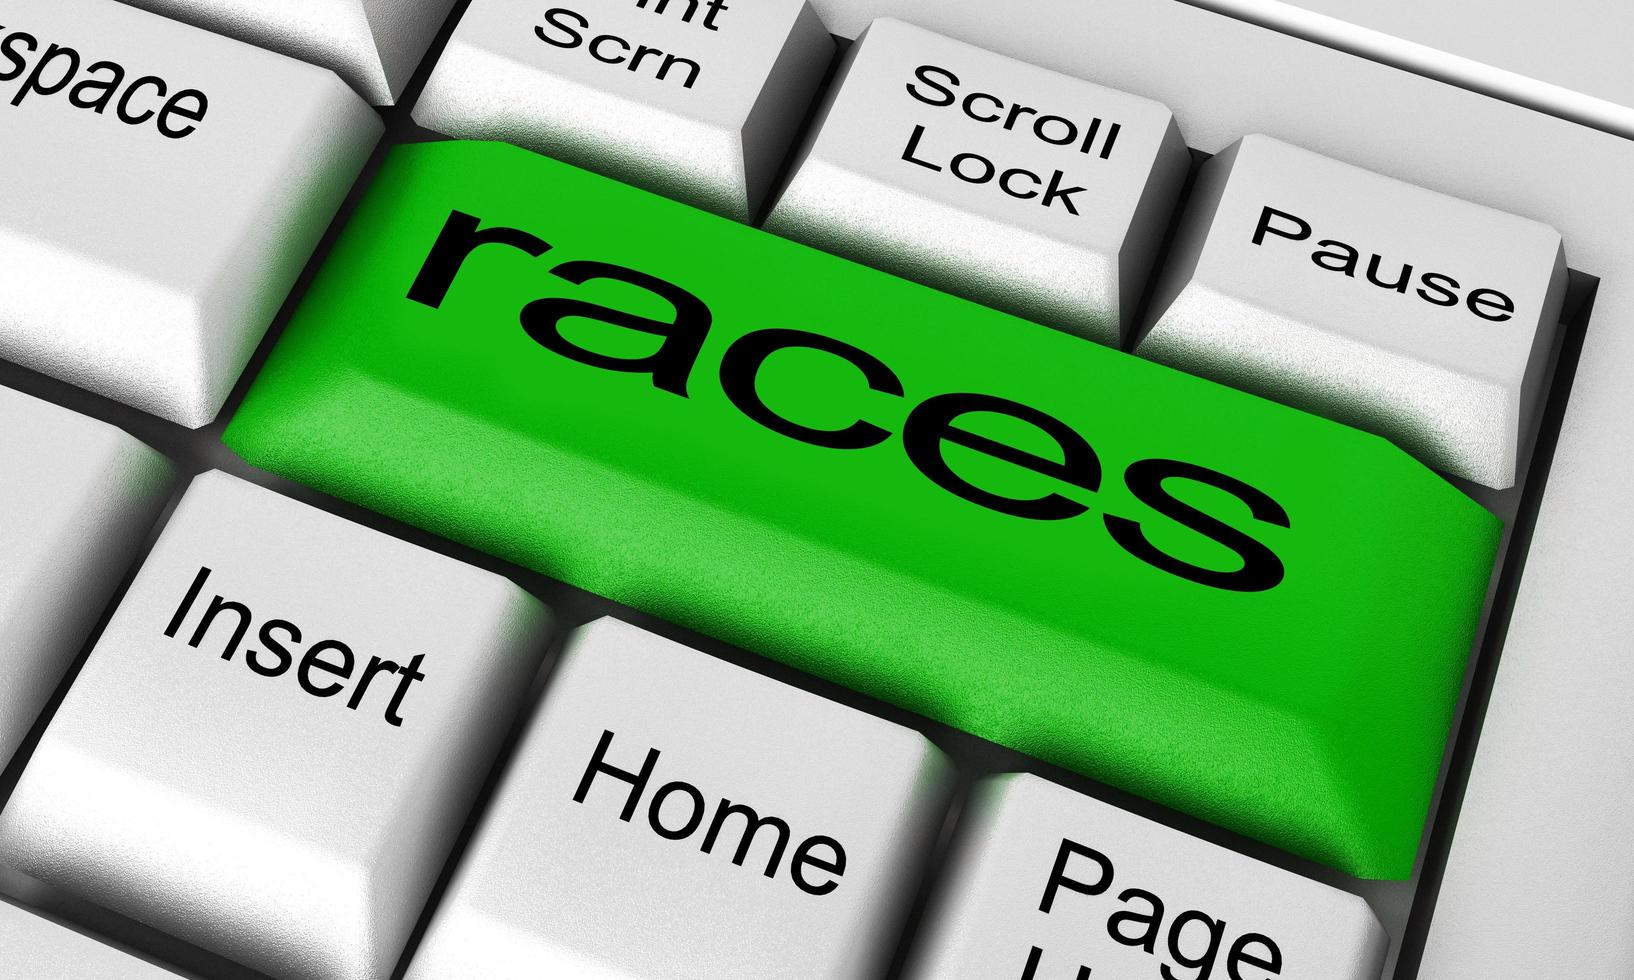 races word on keyboard button photo